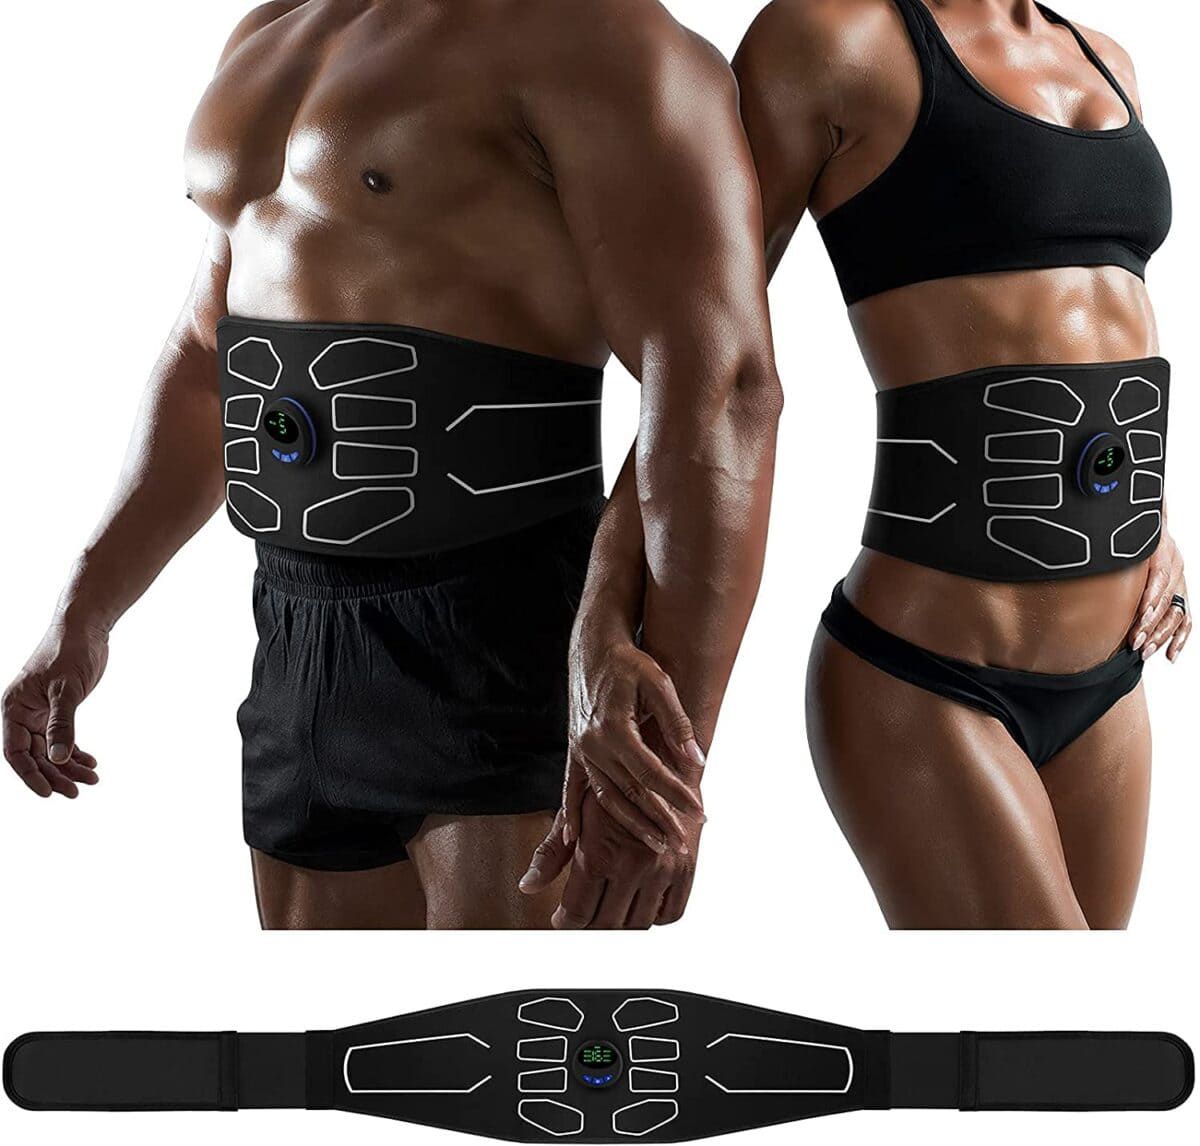 Labor Day Sale: Get 15% Off the MarCoolTrip MZ-4 Abdominal Muscle Toner –  The Ultimate Fitness Gear for Sculpting Your Abs